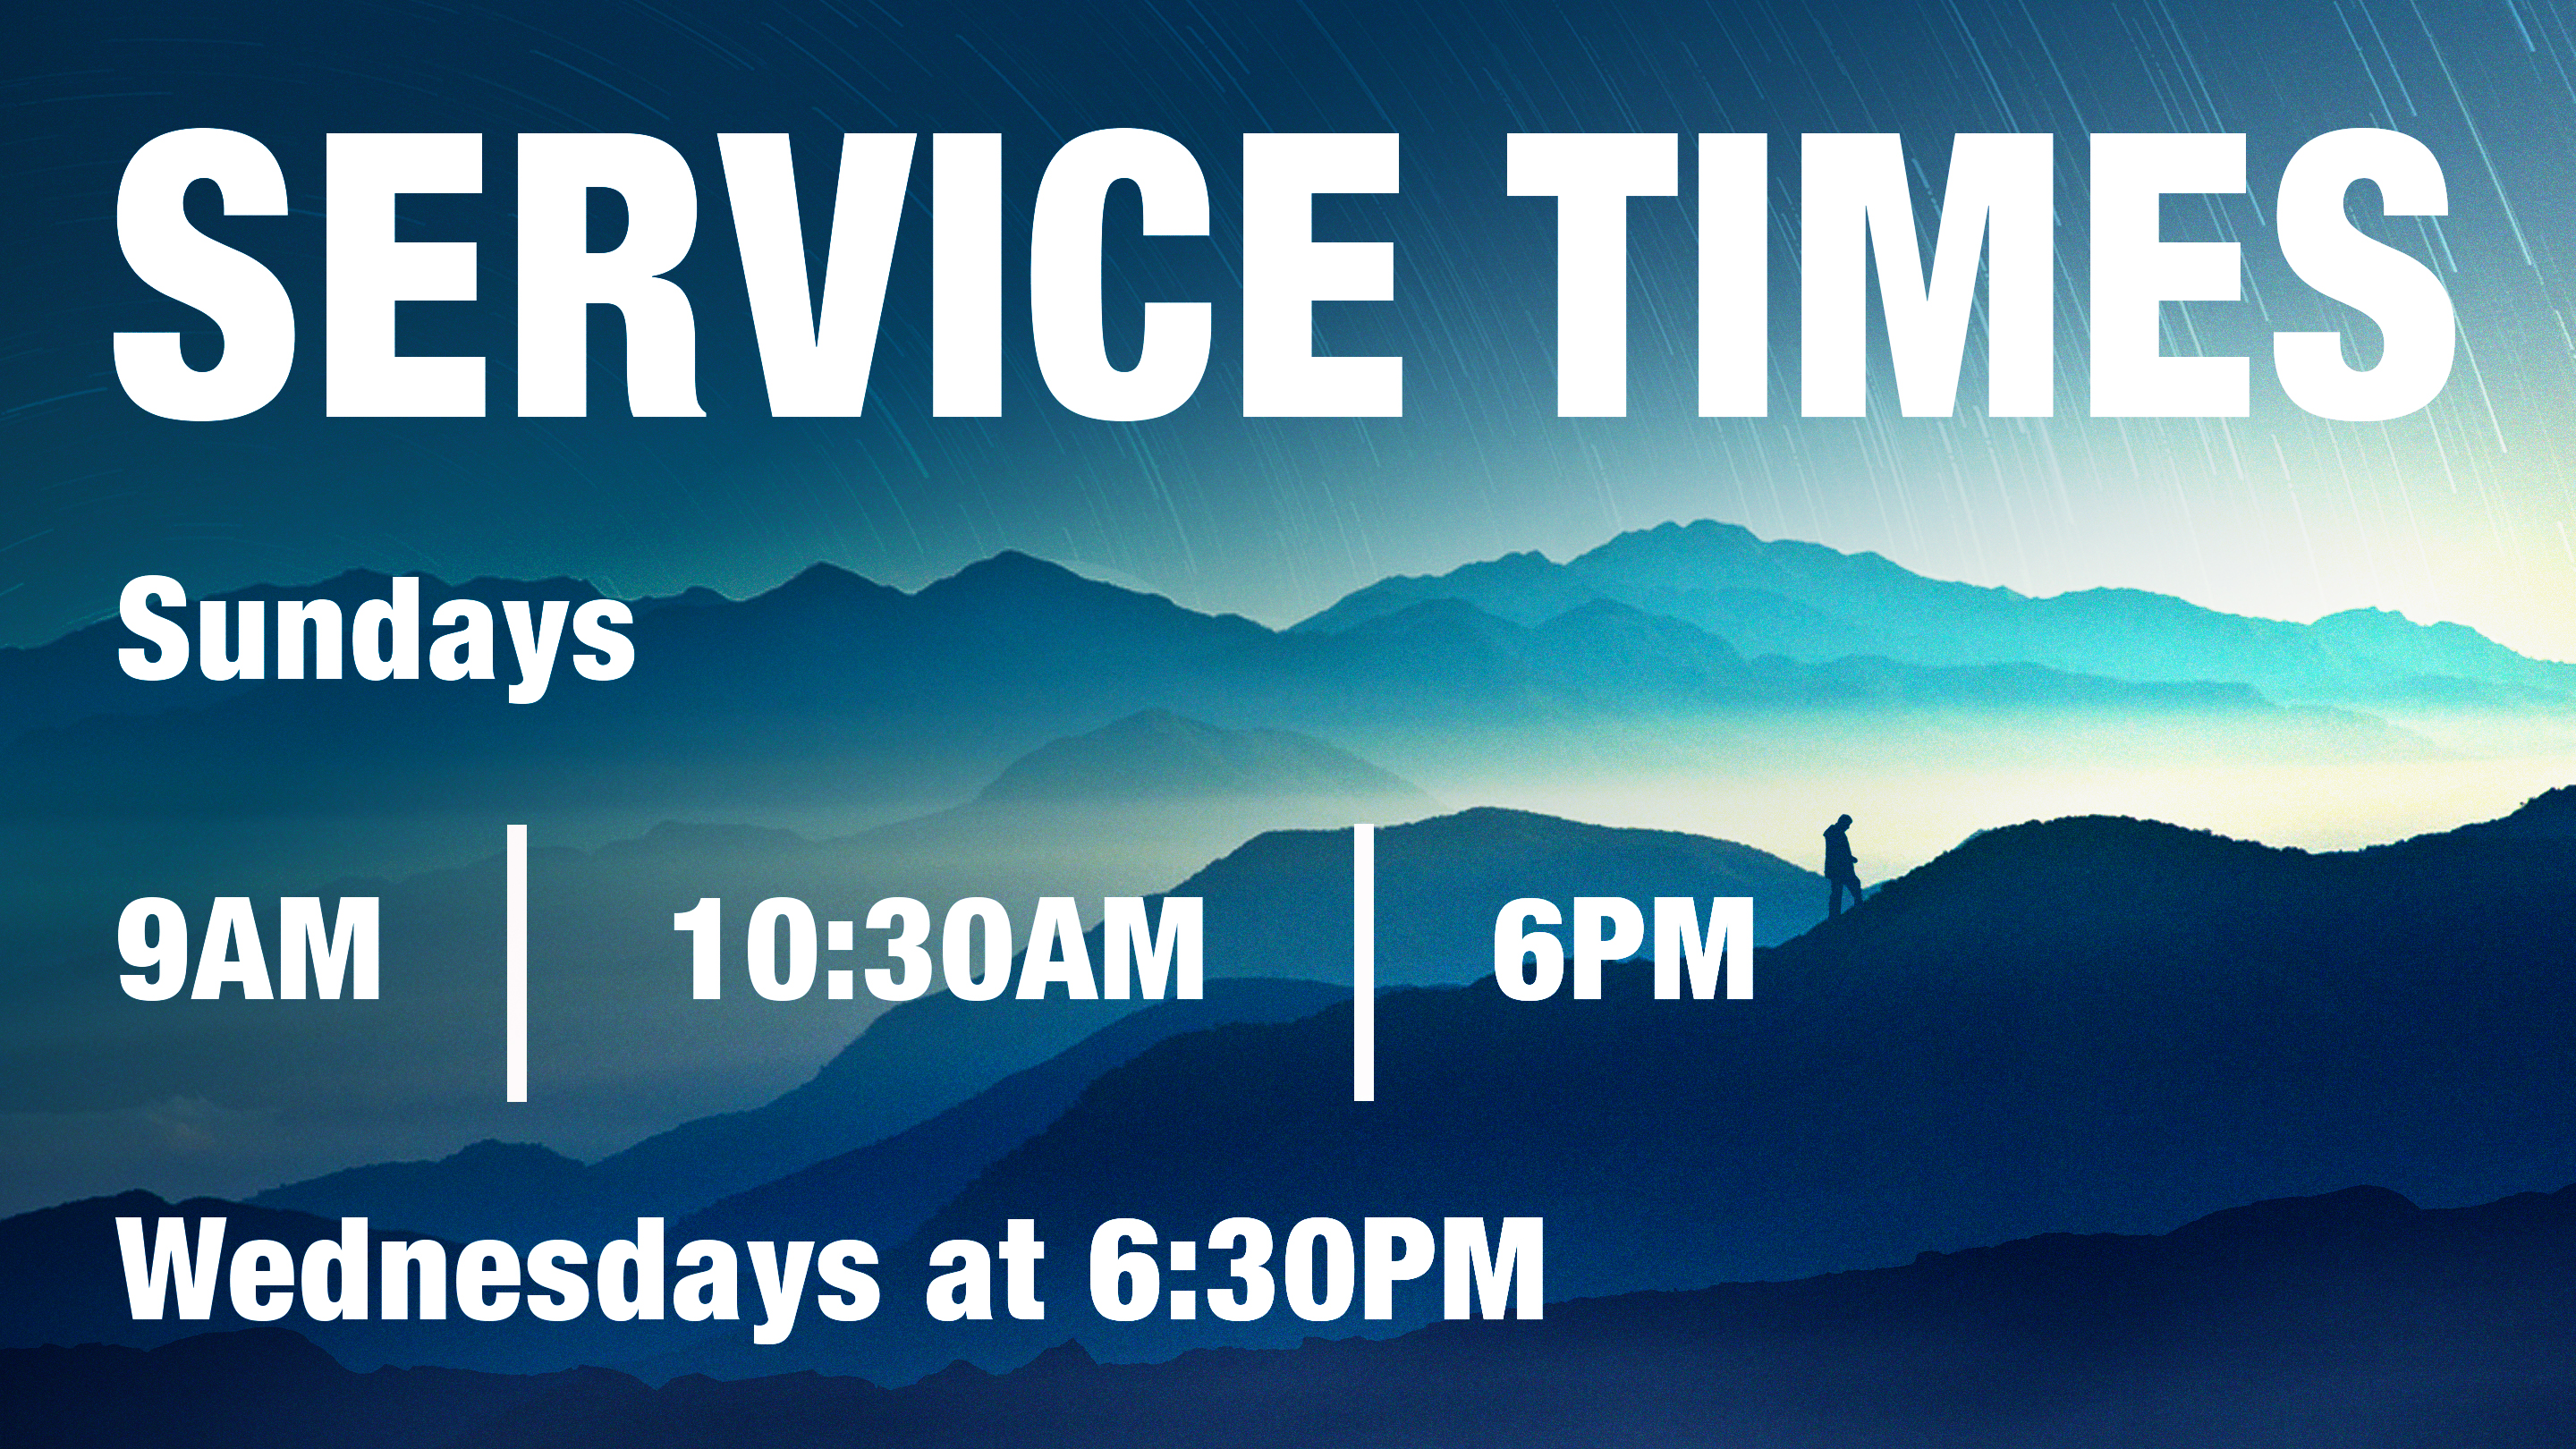 Learn when the services start here at synergy church ministries!